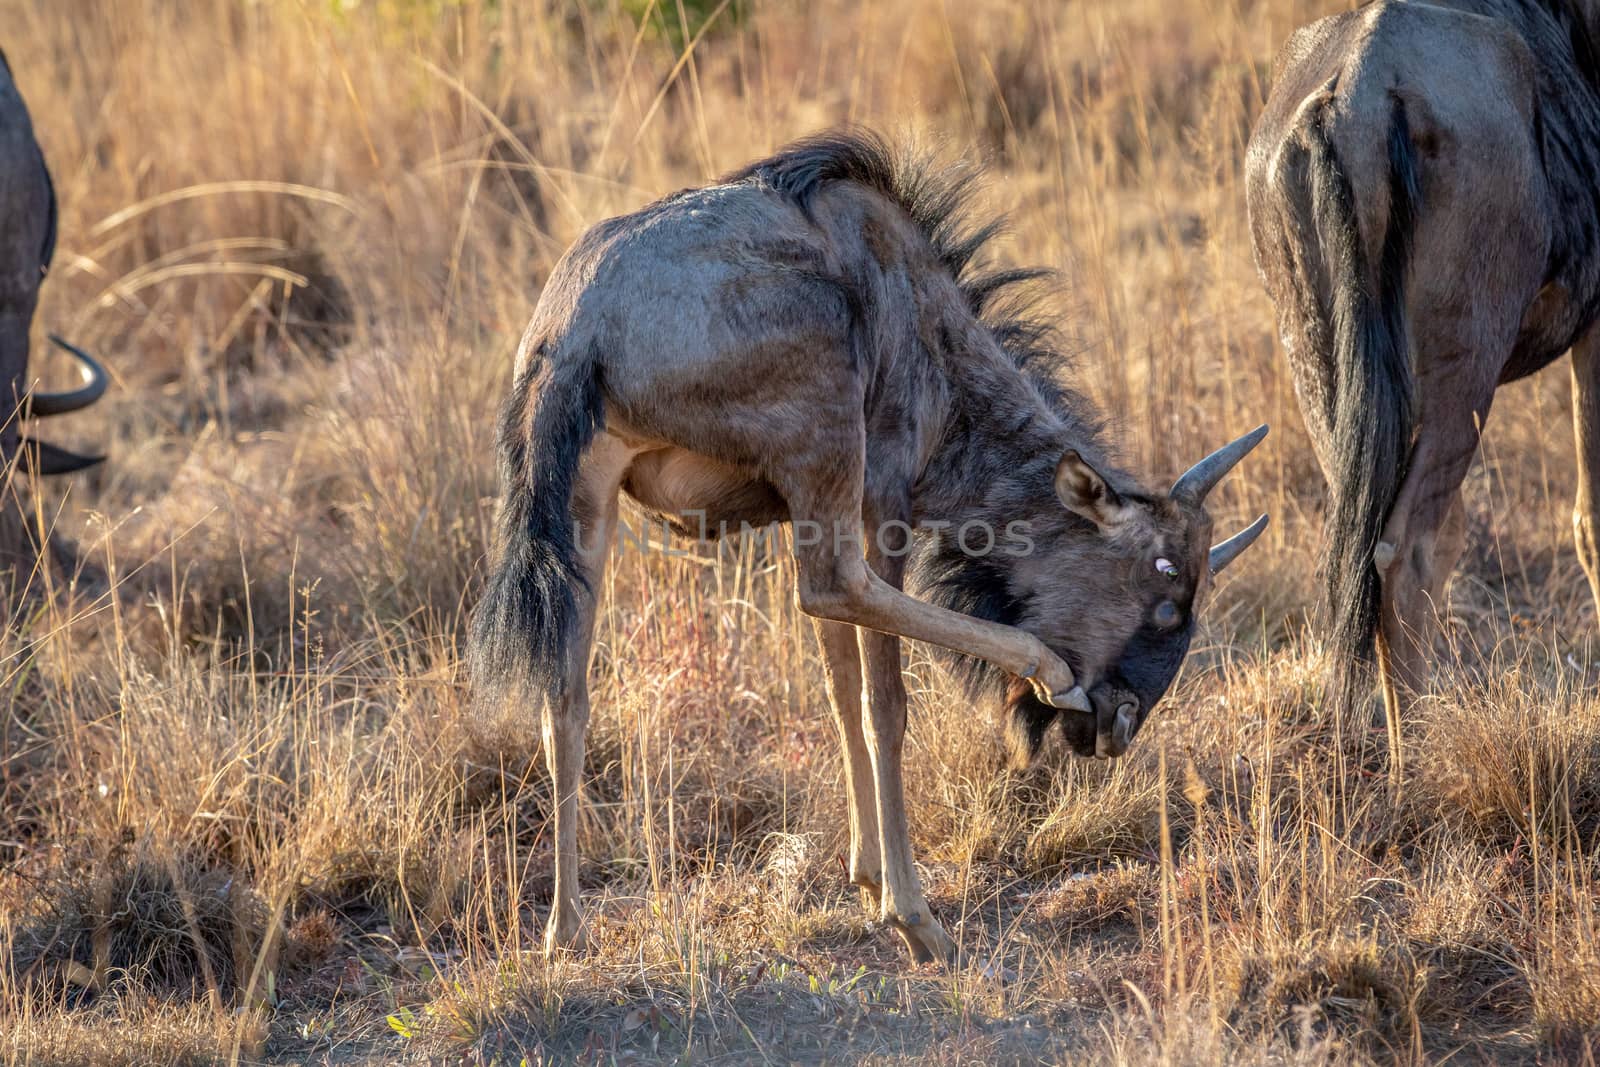 Blue wildebeest scratching himself. by Simoneemanphotography